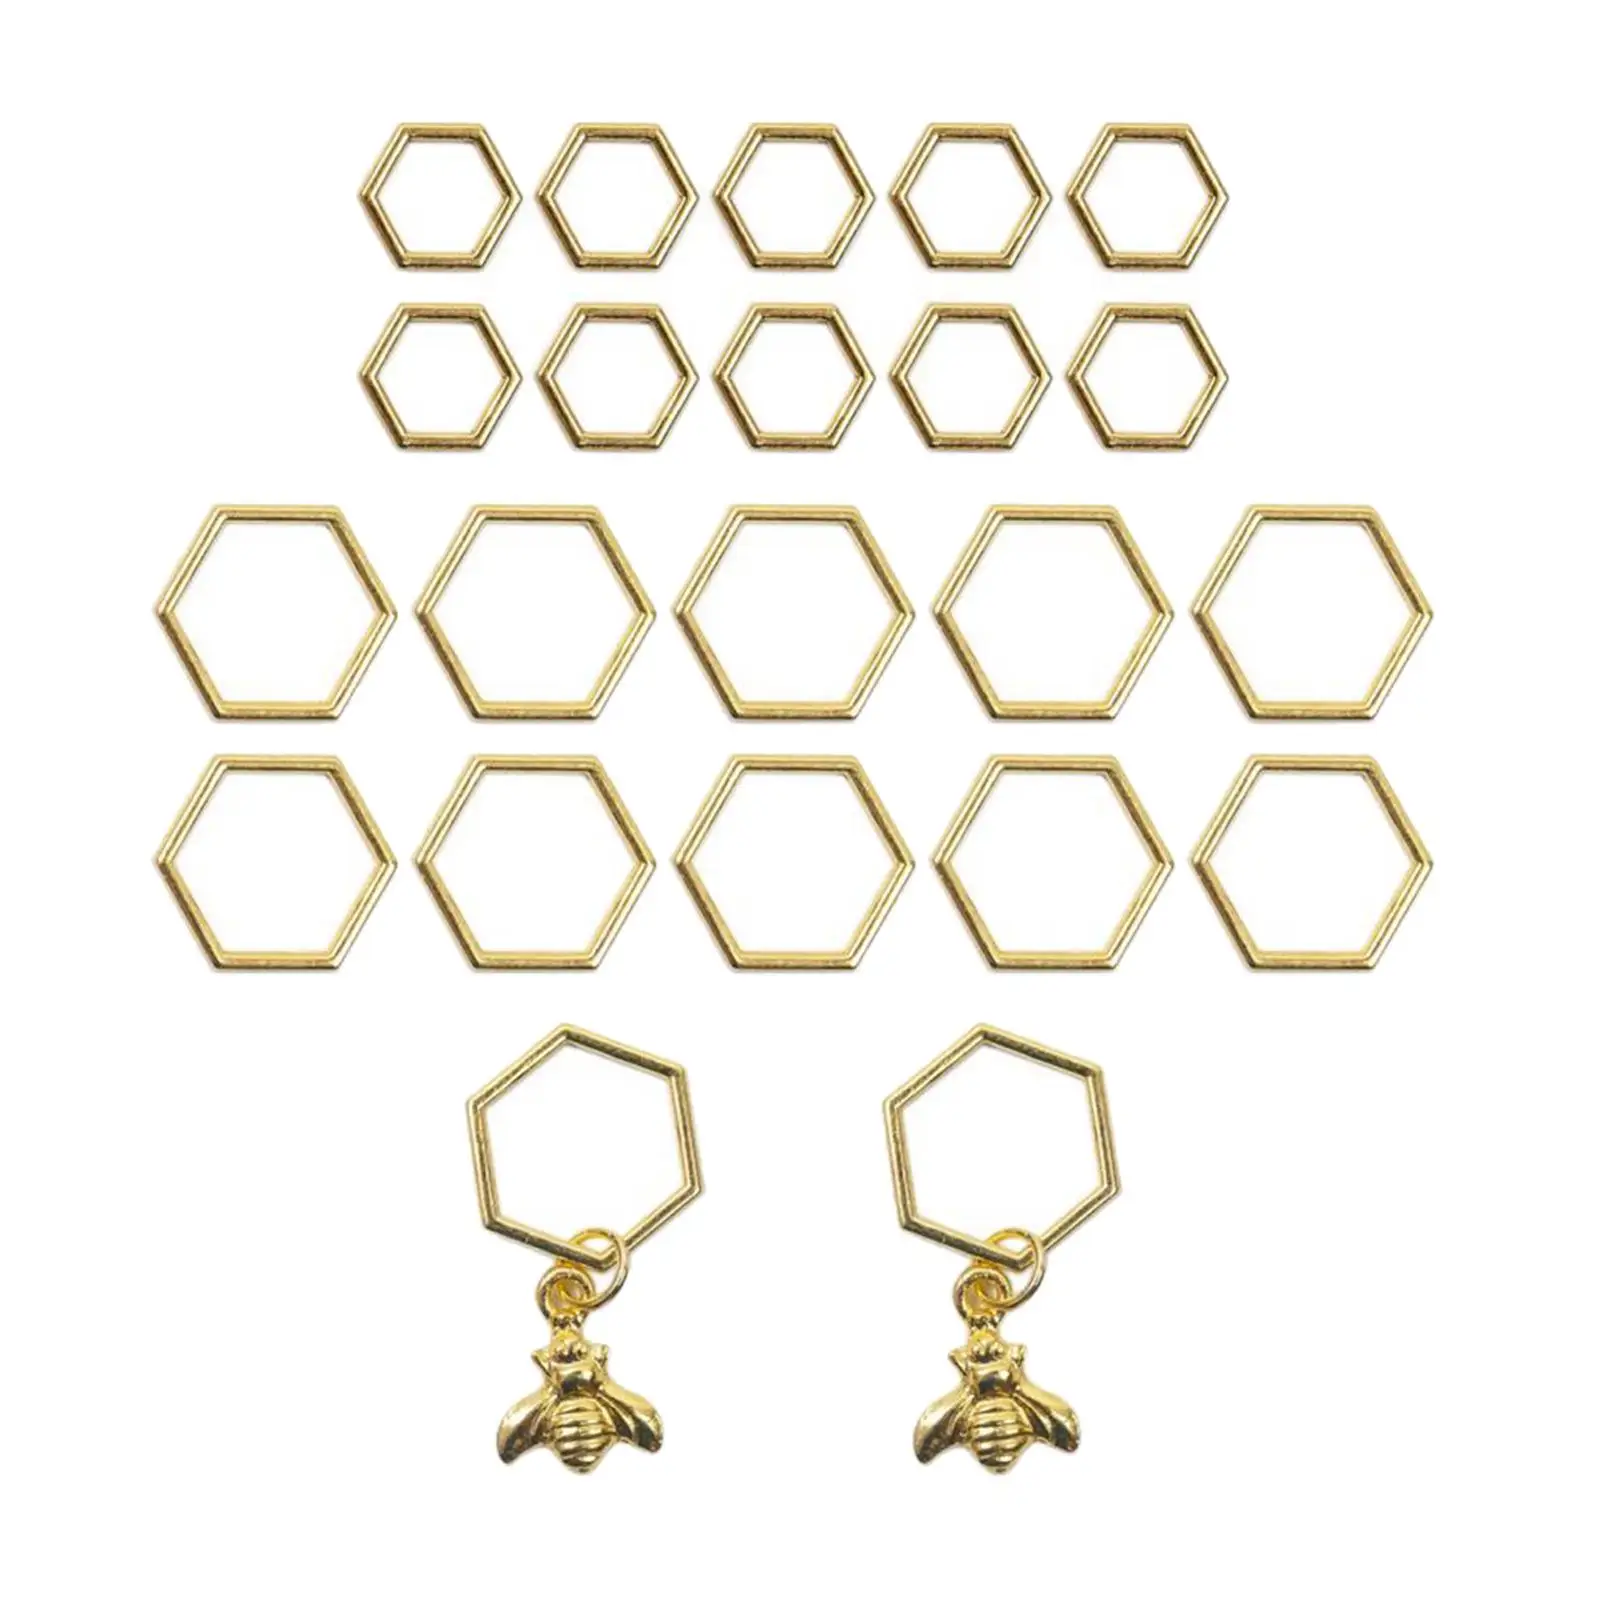 Universal Ring Stitch Markers Golden Bee Shape Durable Craft Art DIY Ring Marker Woven Marker Buckle for Scarf Weaving Tool